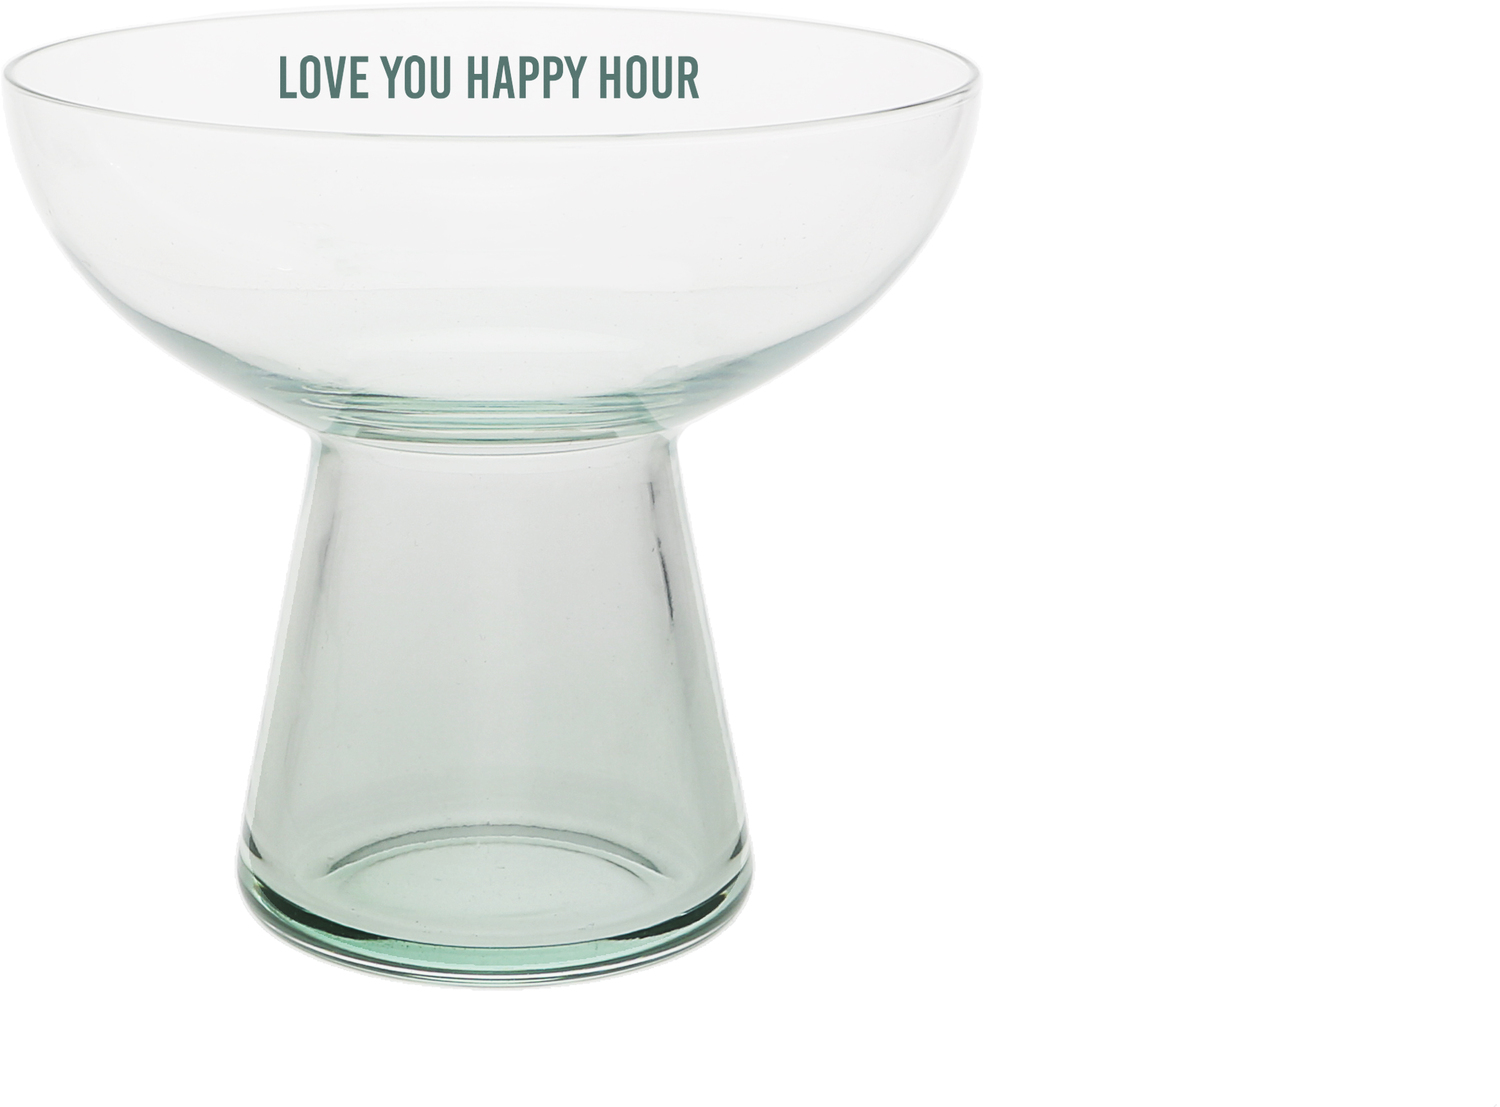 Love You Happy Hour by Love You - Love You Happy Hour - 15 oz Cocktail Glass